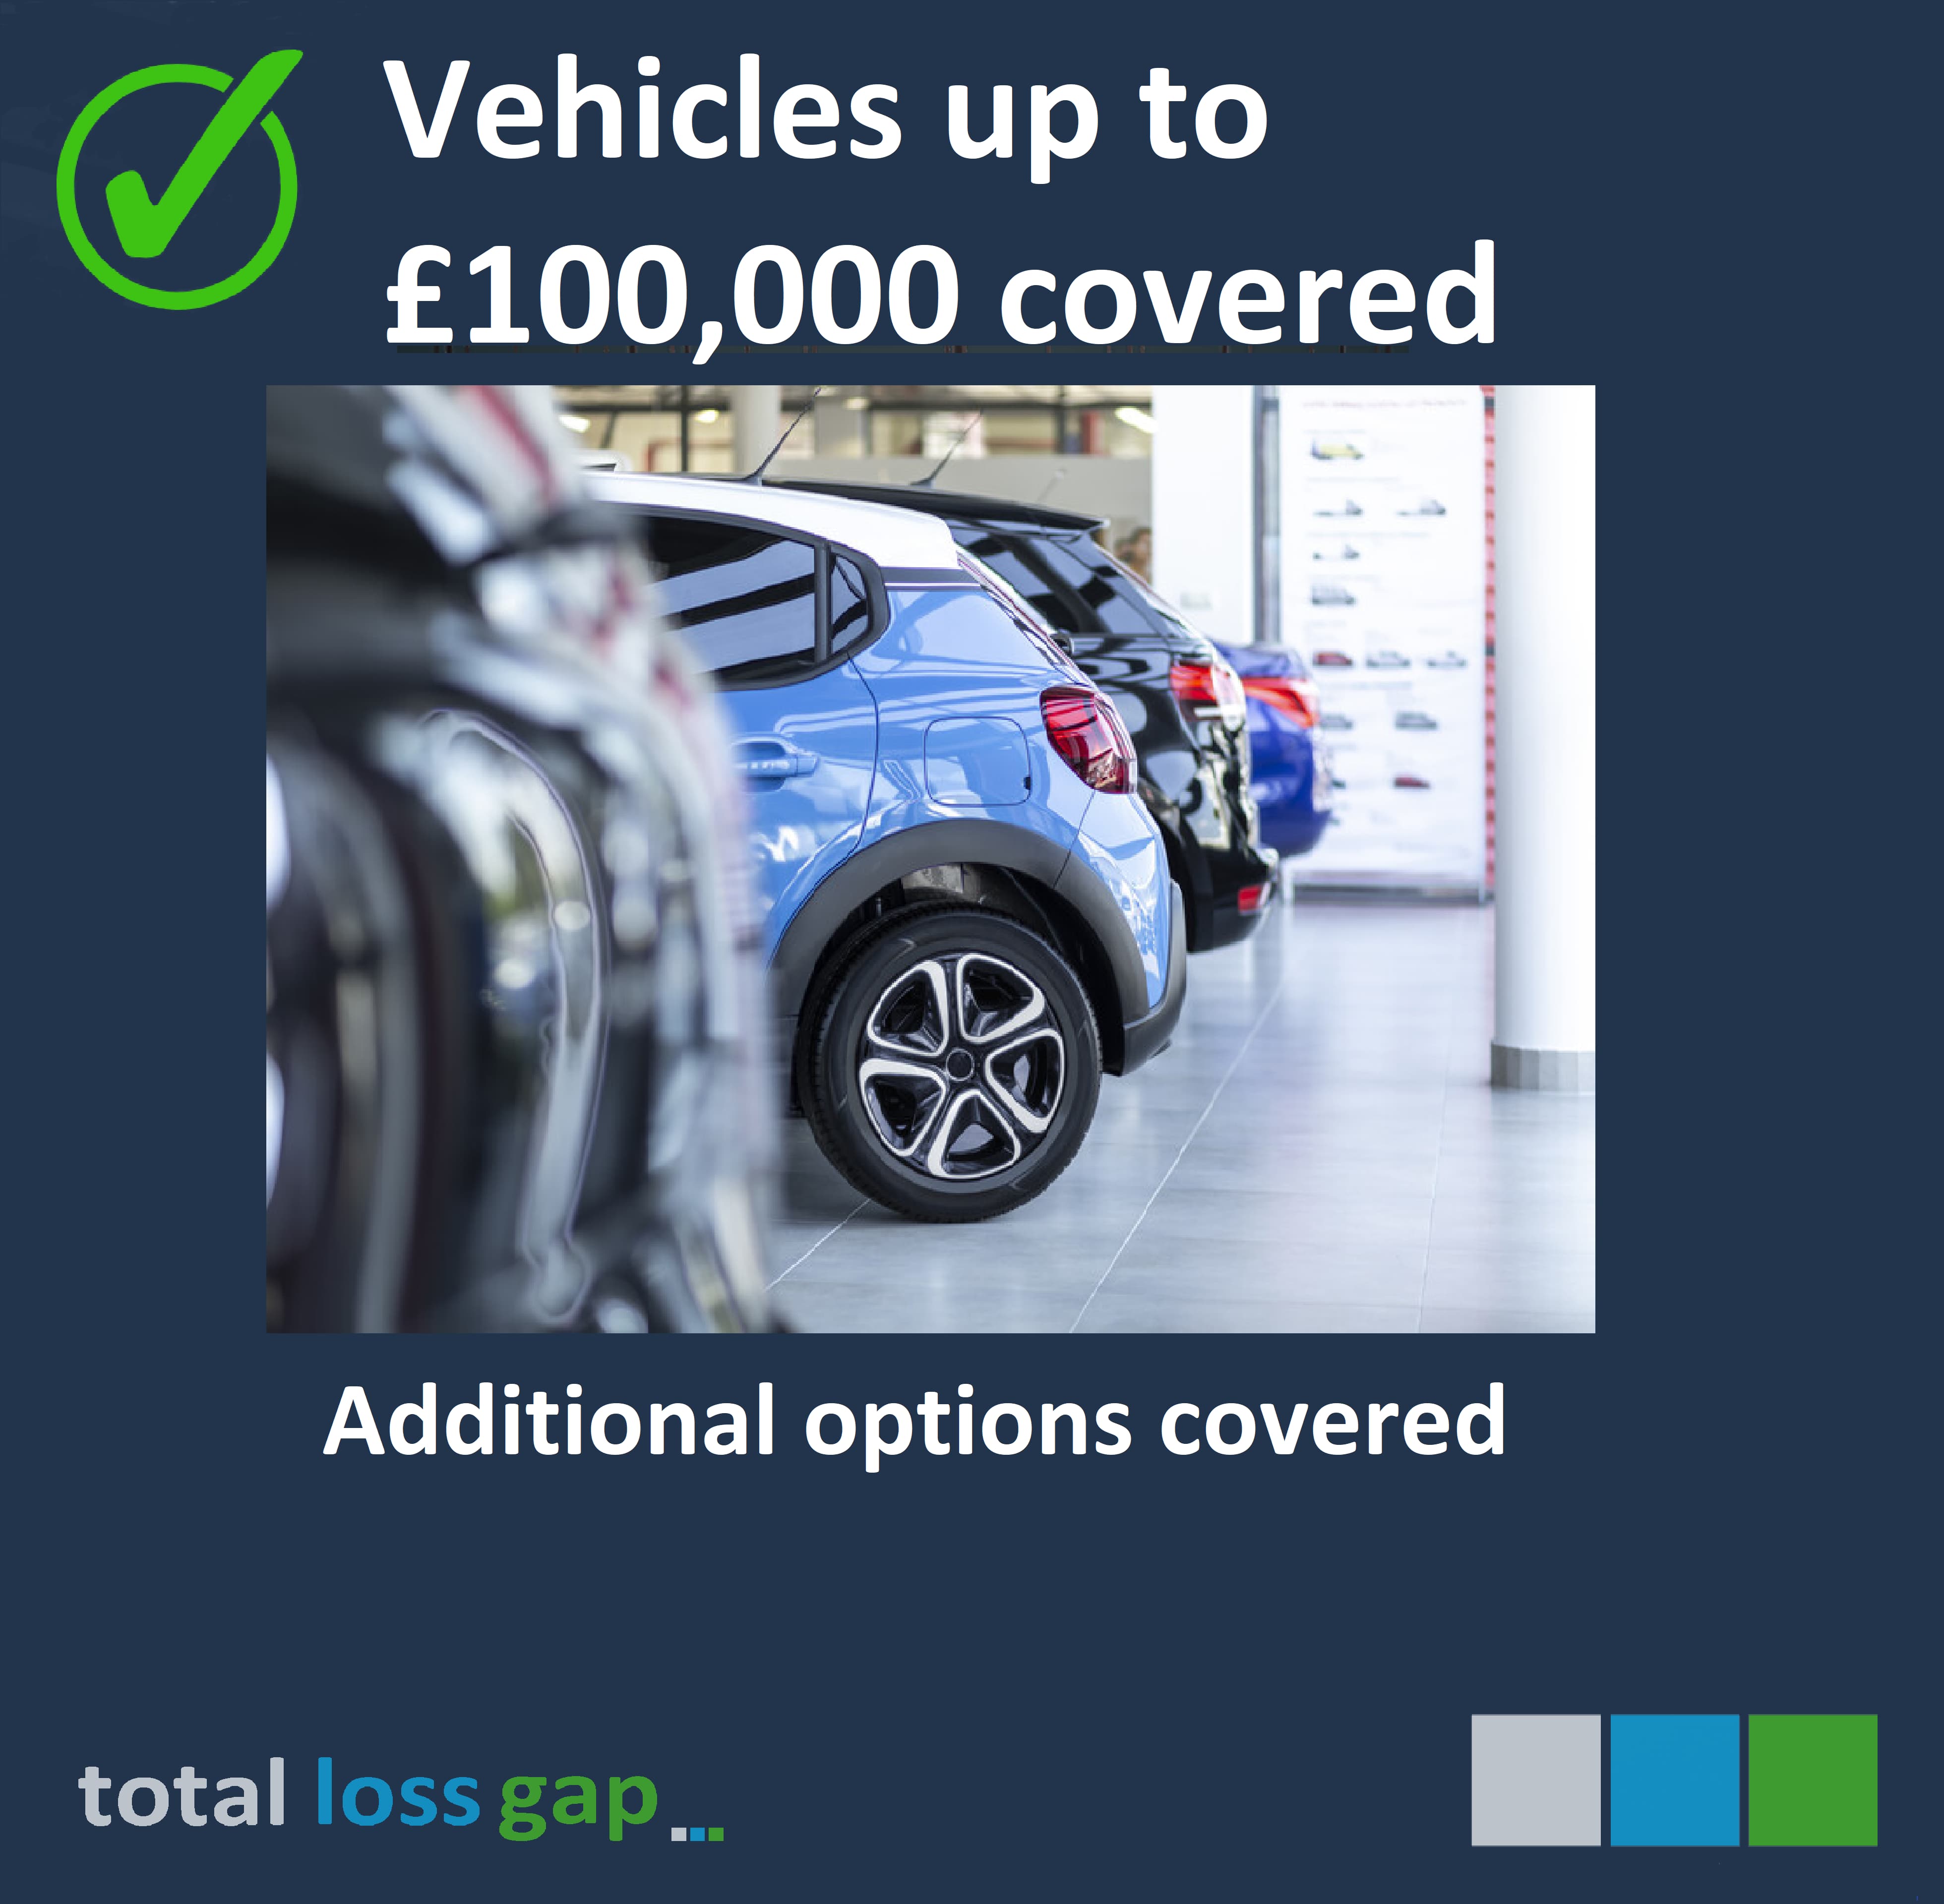 We can cover vehicles up to £100,000